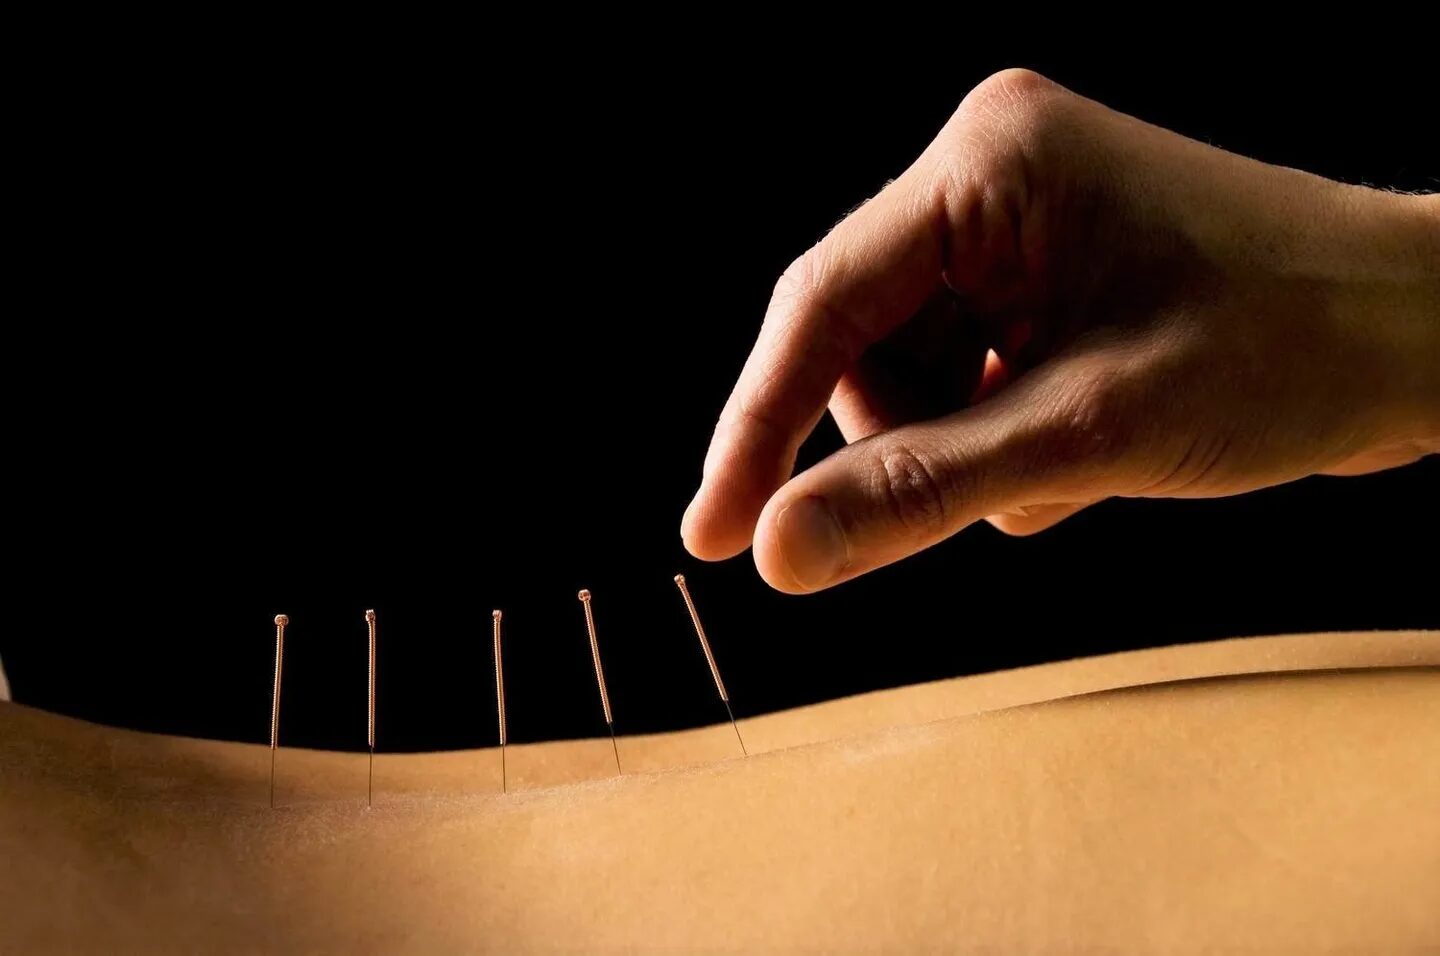 A person is using acupuncture needles to treat an illness.